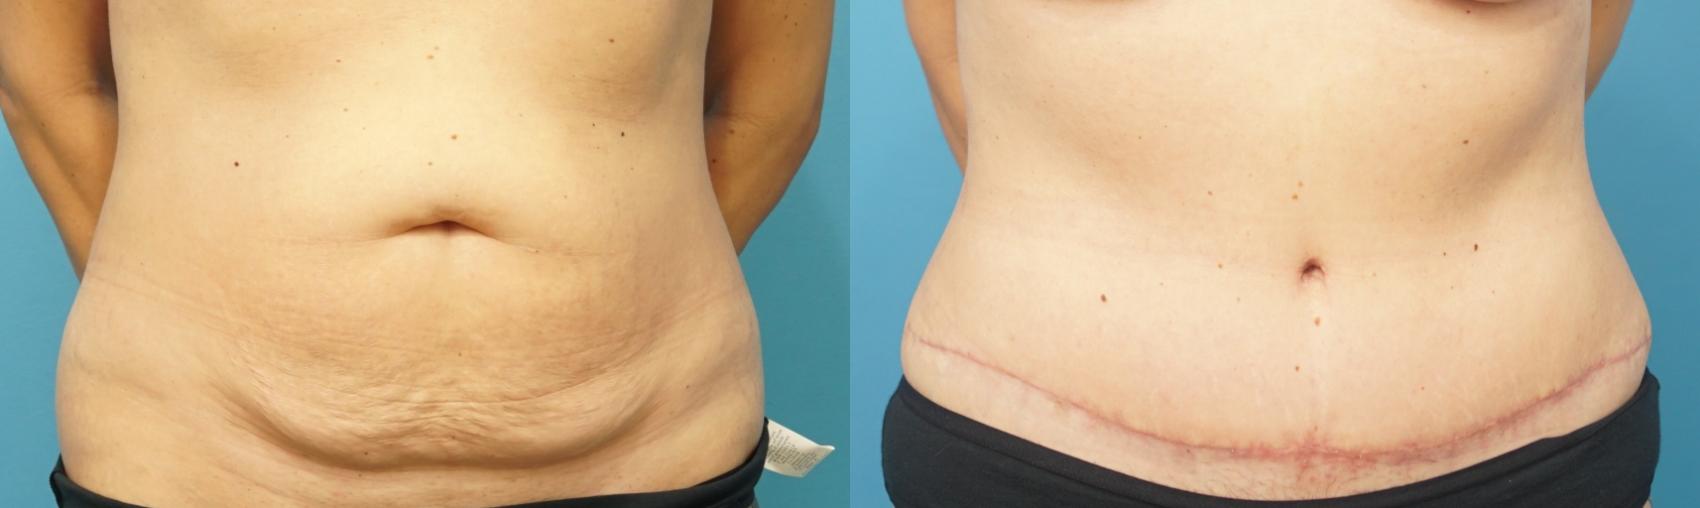 Before & After Abdominoplasty/Tummy Tuck Case 281 Front View in Northbrook, IL